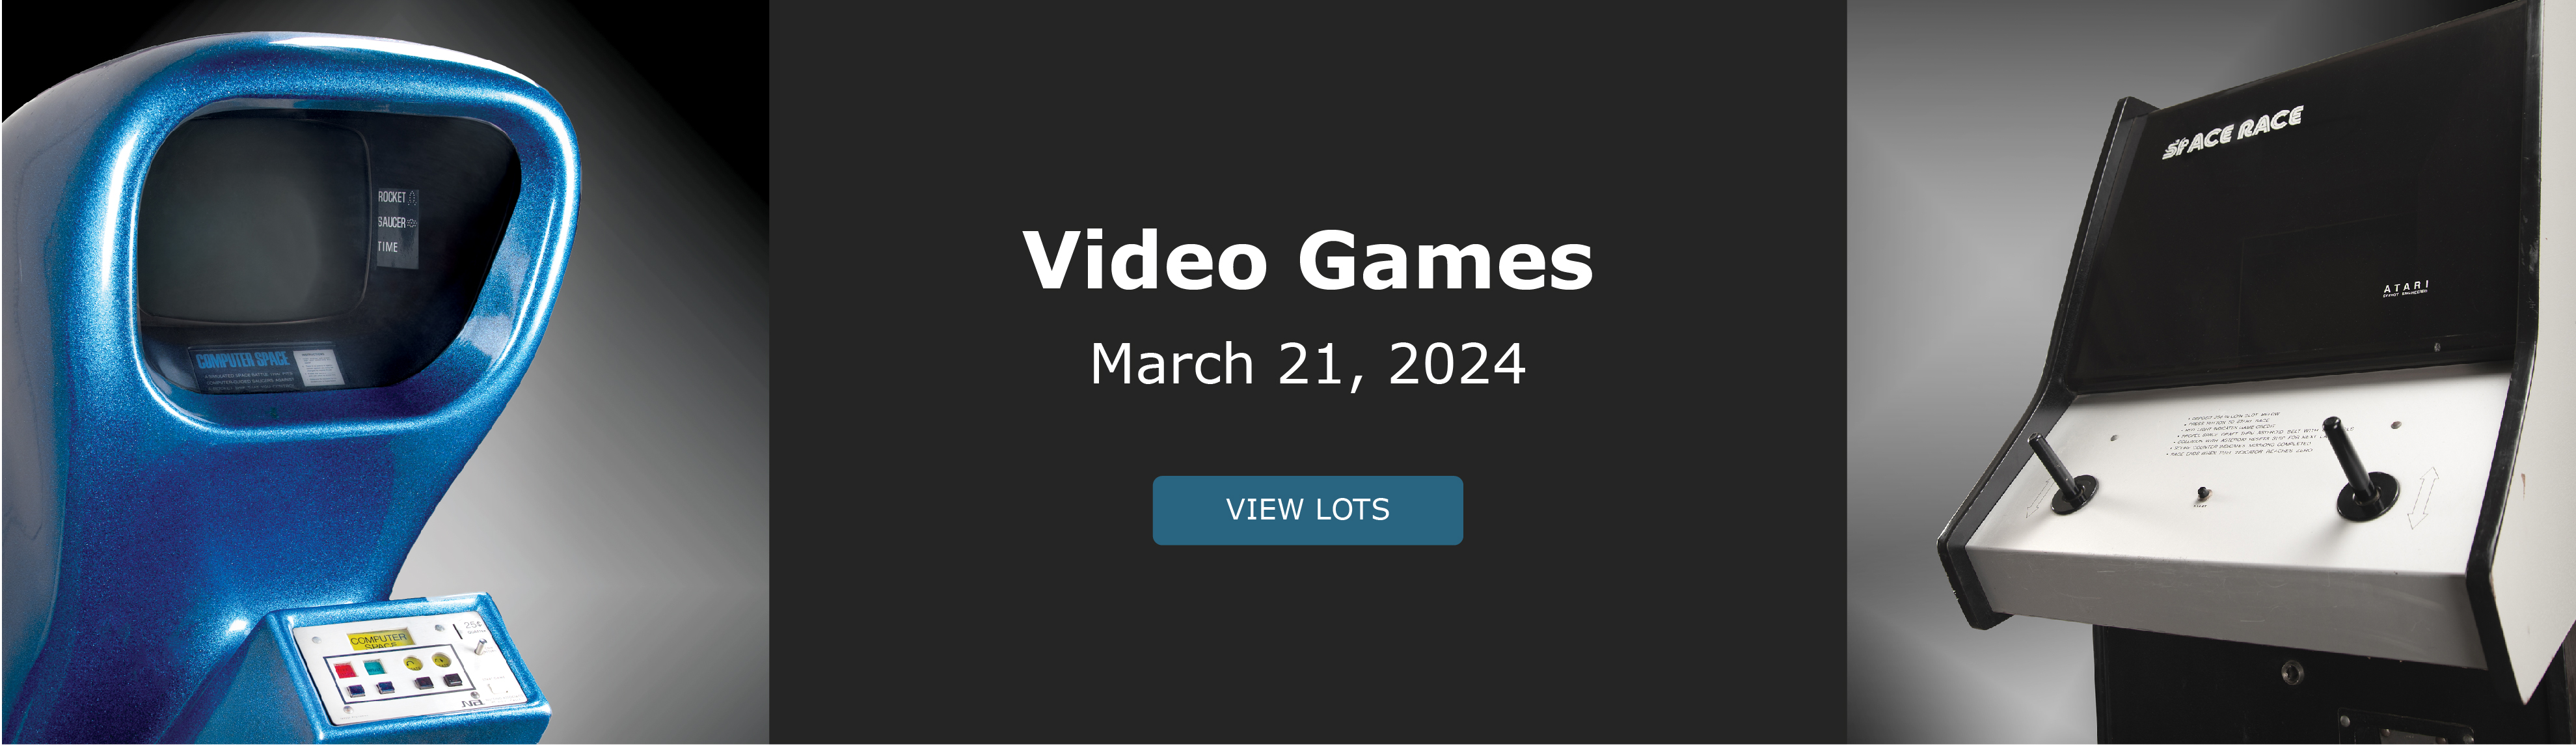 Video Games. Bidding closes March 21. View Lots!